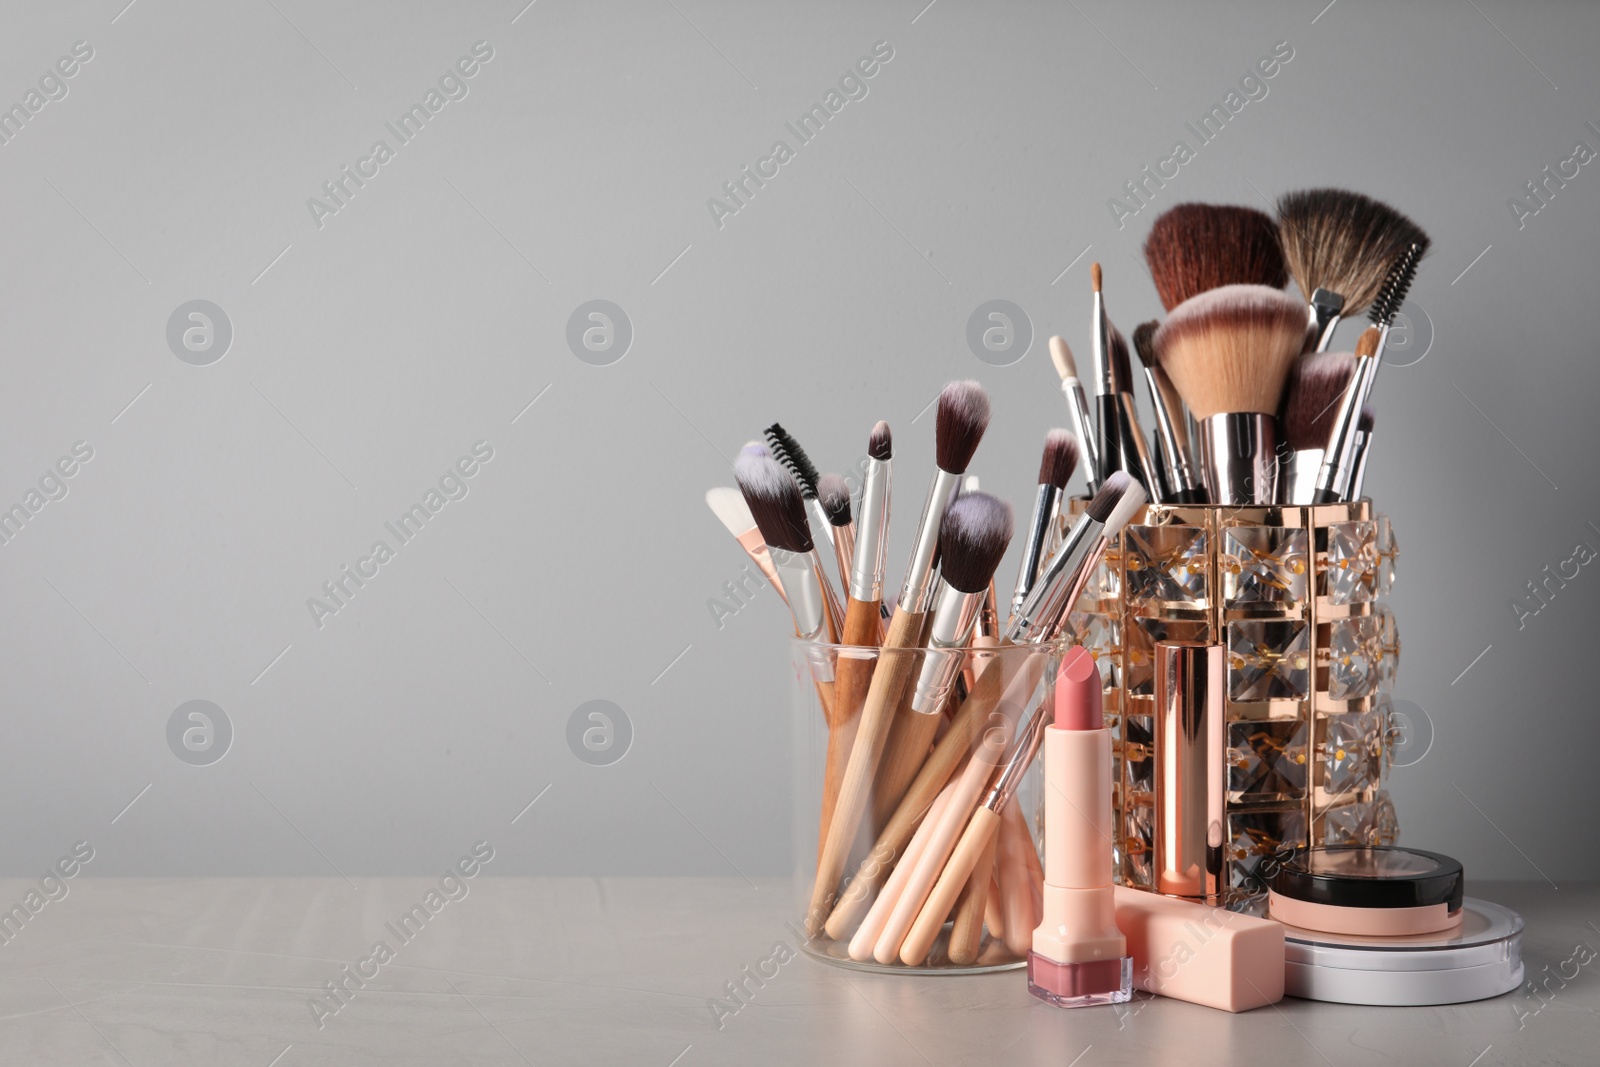 Photo of Set of professional brushes and makeup products on table against grey background, space for text